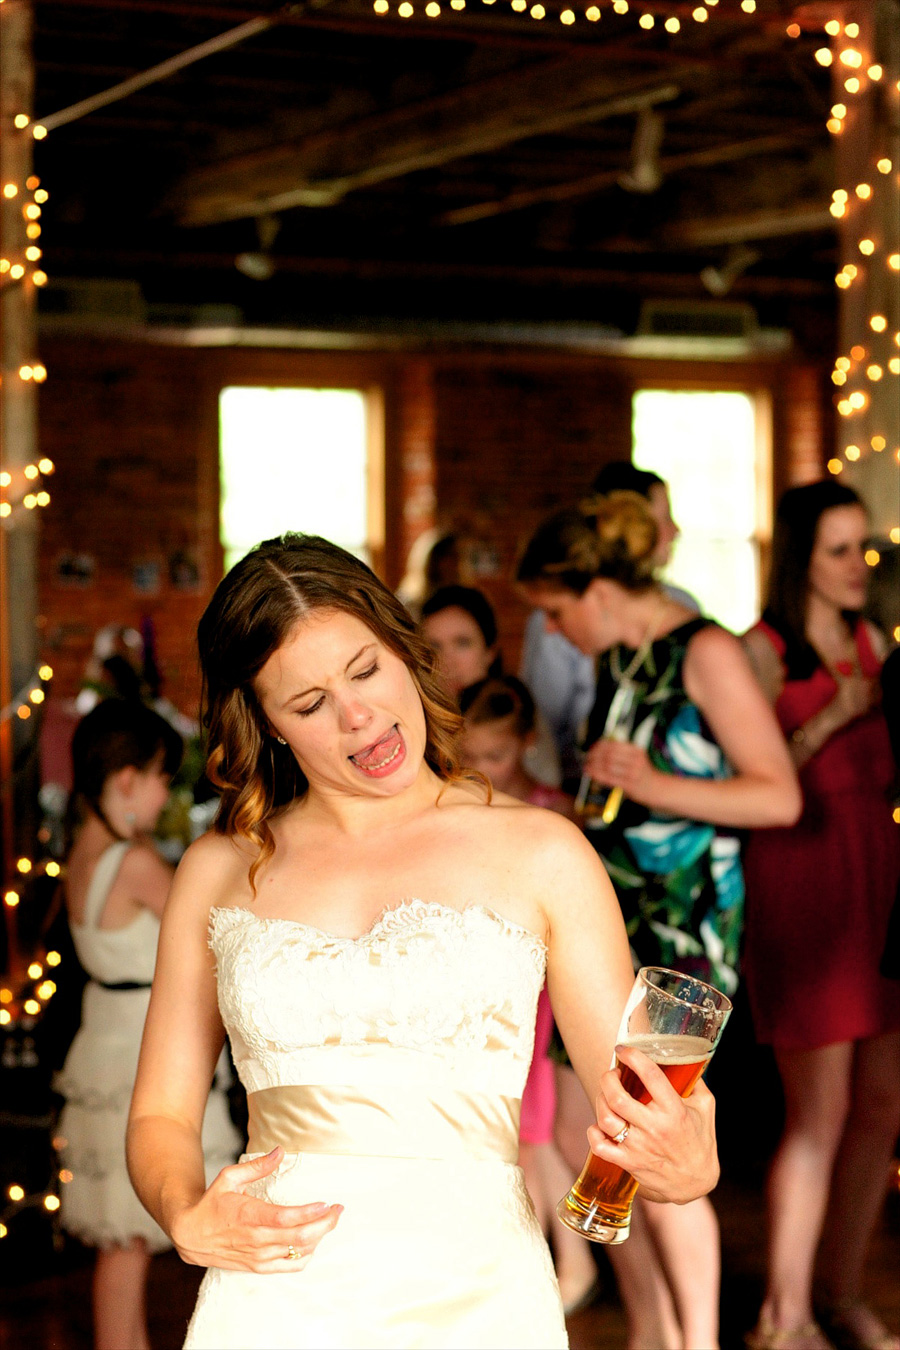 You know it's good when the bride is playing air guitar. :)